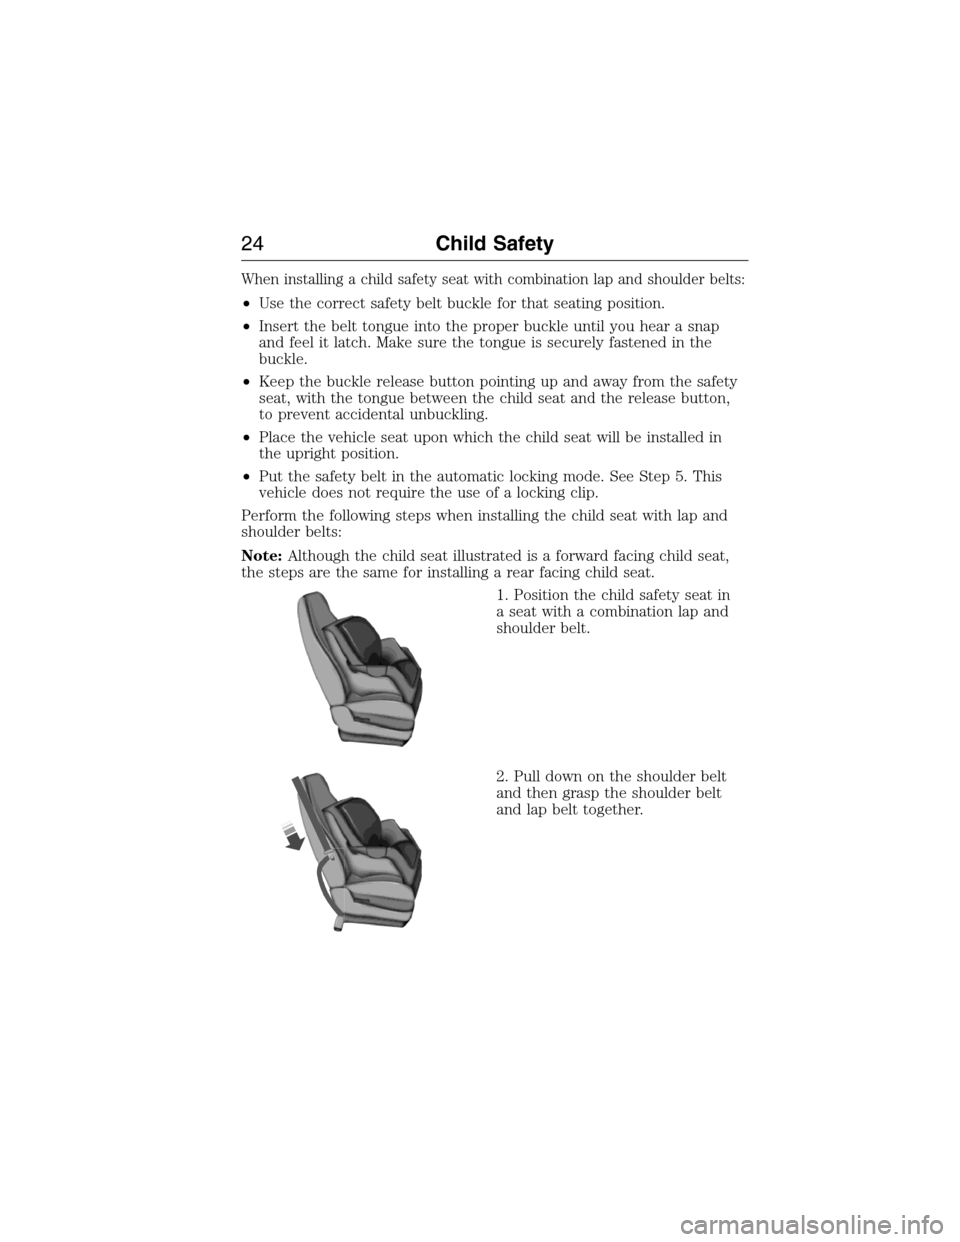 FORD E SERIES 2015 4.G Owners Manual When installing a child safety seat with combination lap and shoulder belts:
•Use the correct safety belt buckle for that seating position.
•Insert the belt tongue into the proper buckle until you